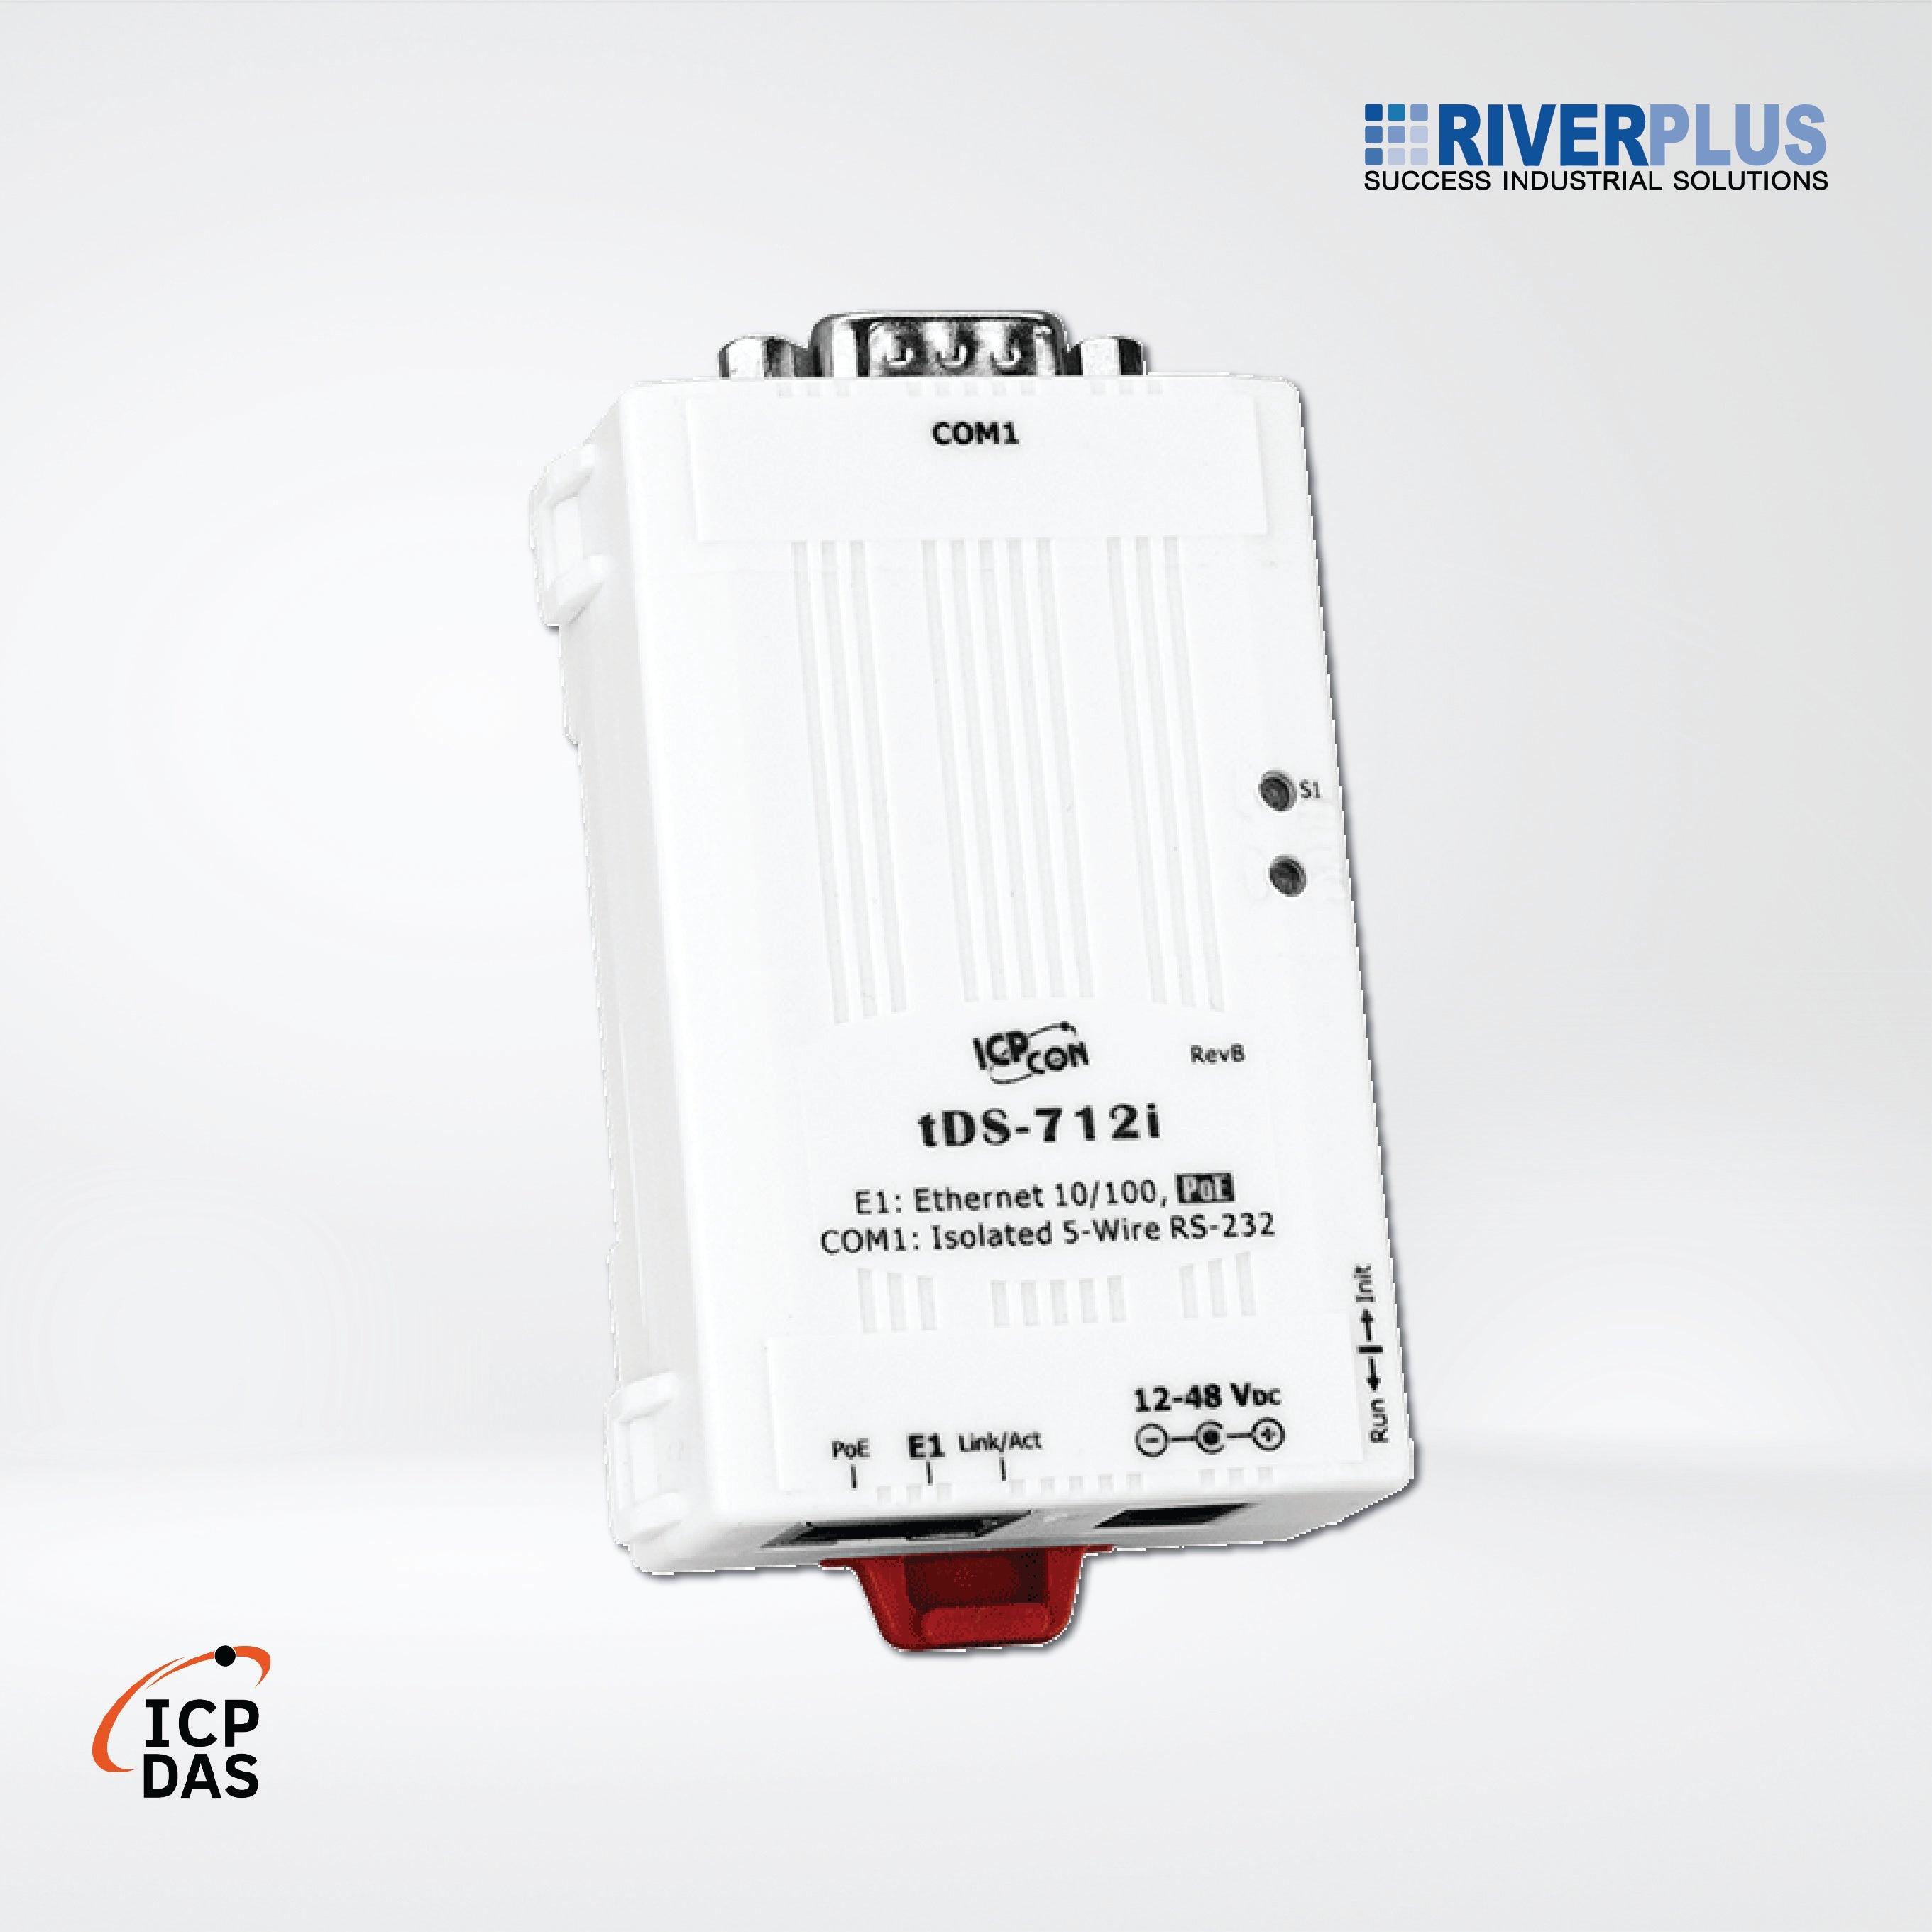 tDS-712i CR Tiny (1x Isolated RS-232, DB9 Male) Serial-to-Ethernet Device Server - Riverplus